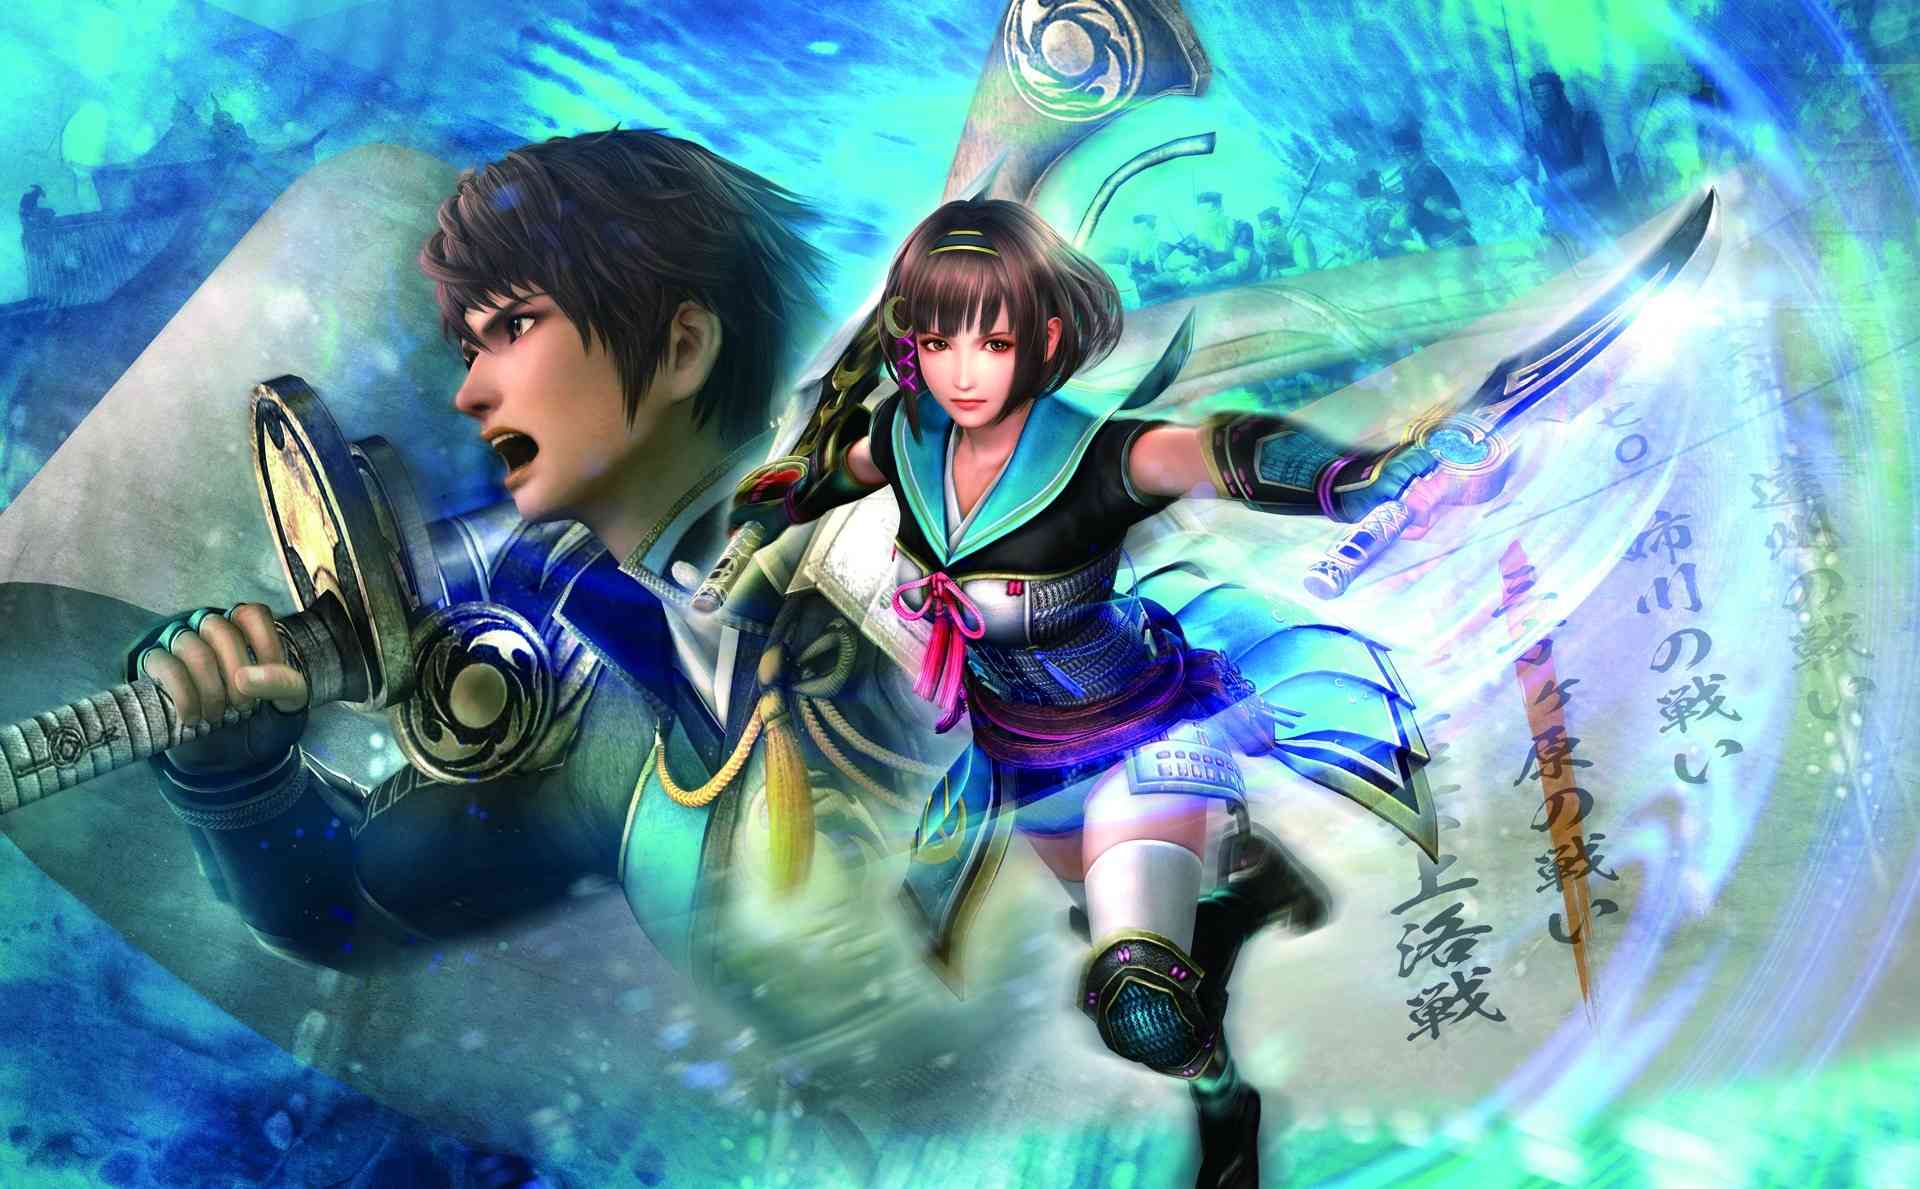 samurai-warriors-chronicles-3-review-fun-hack-slasher-held-back-by-3ds-limitations